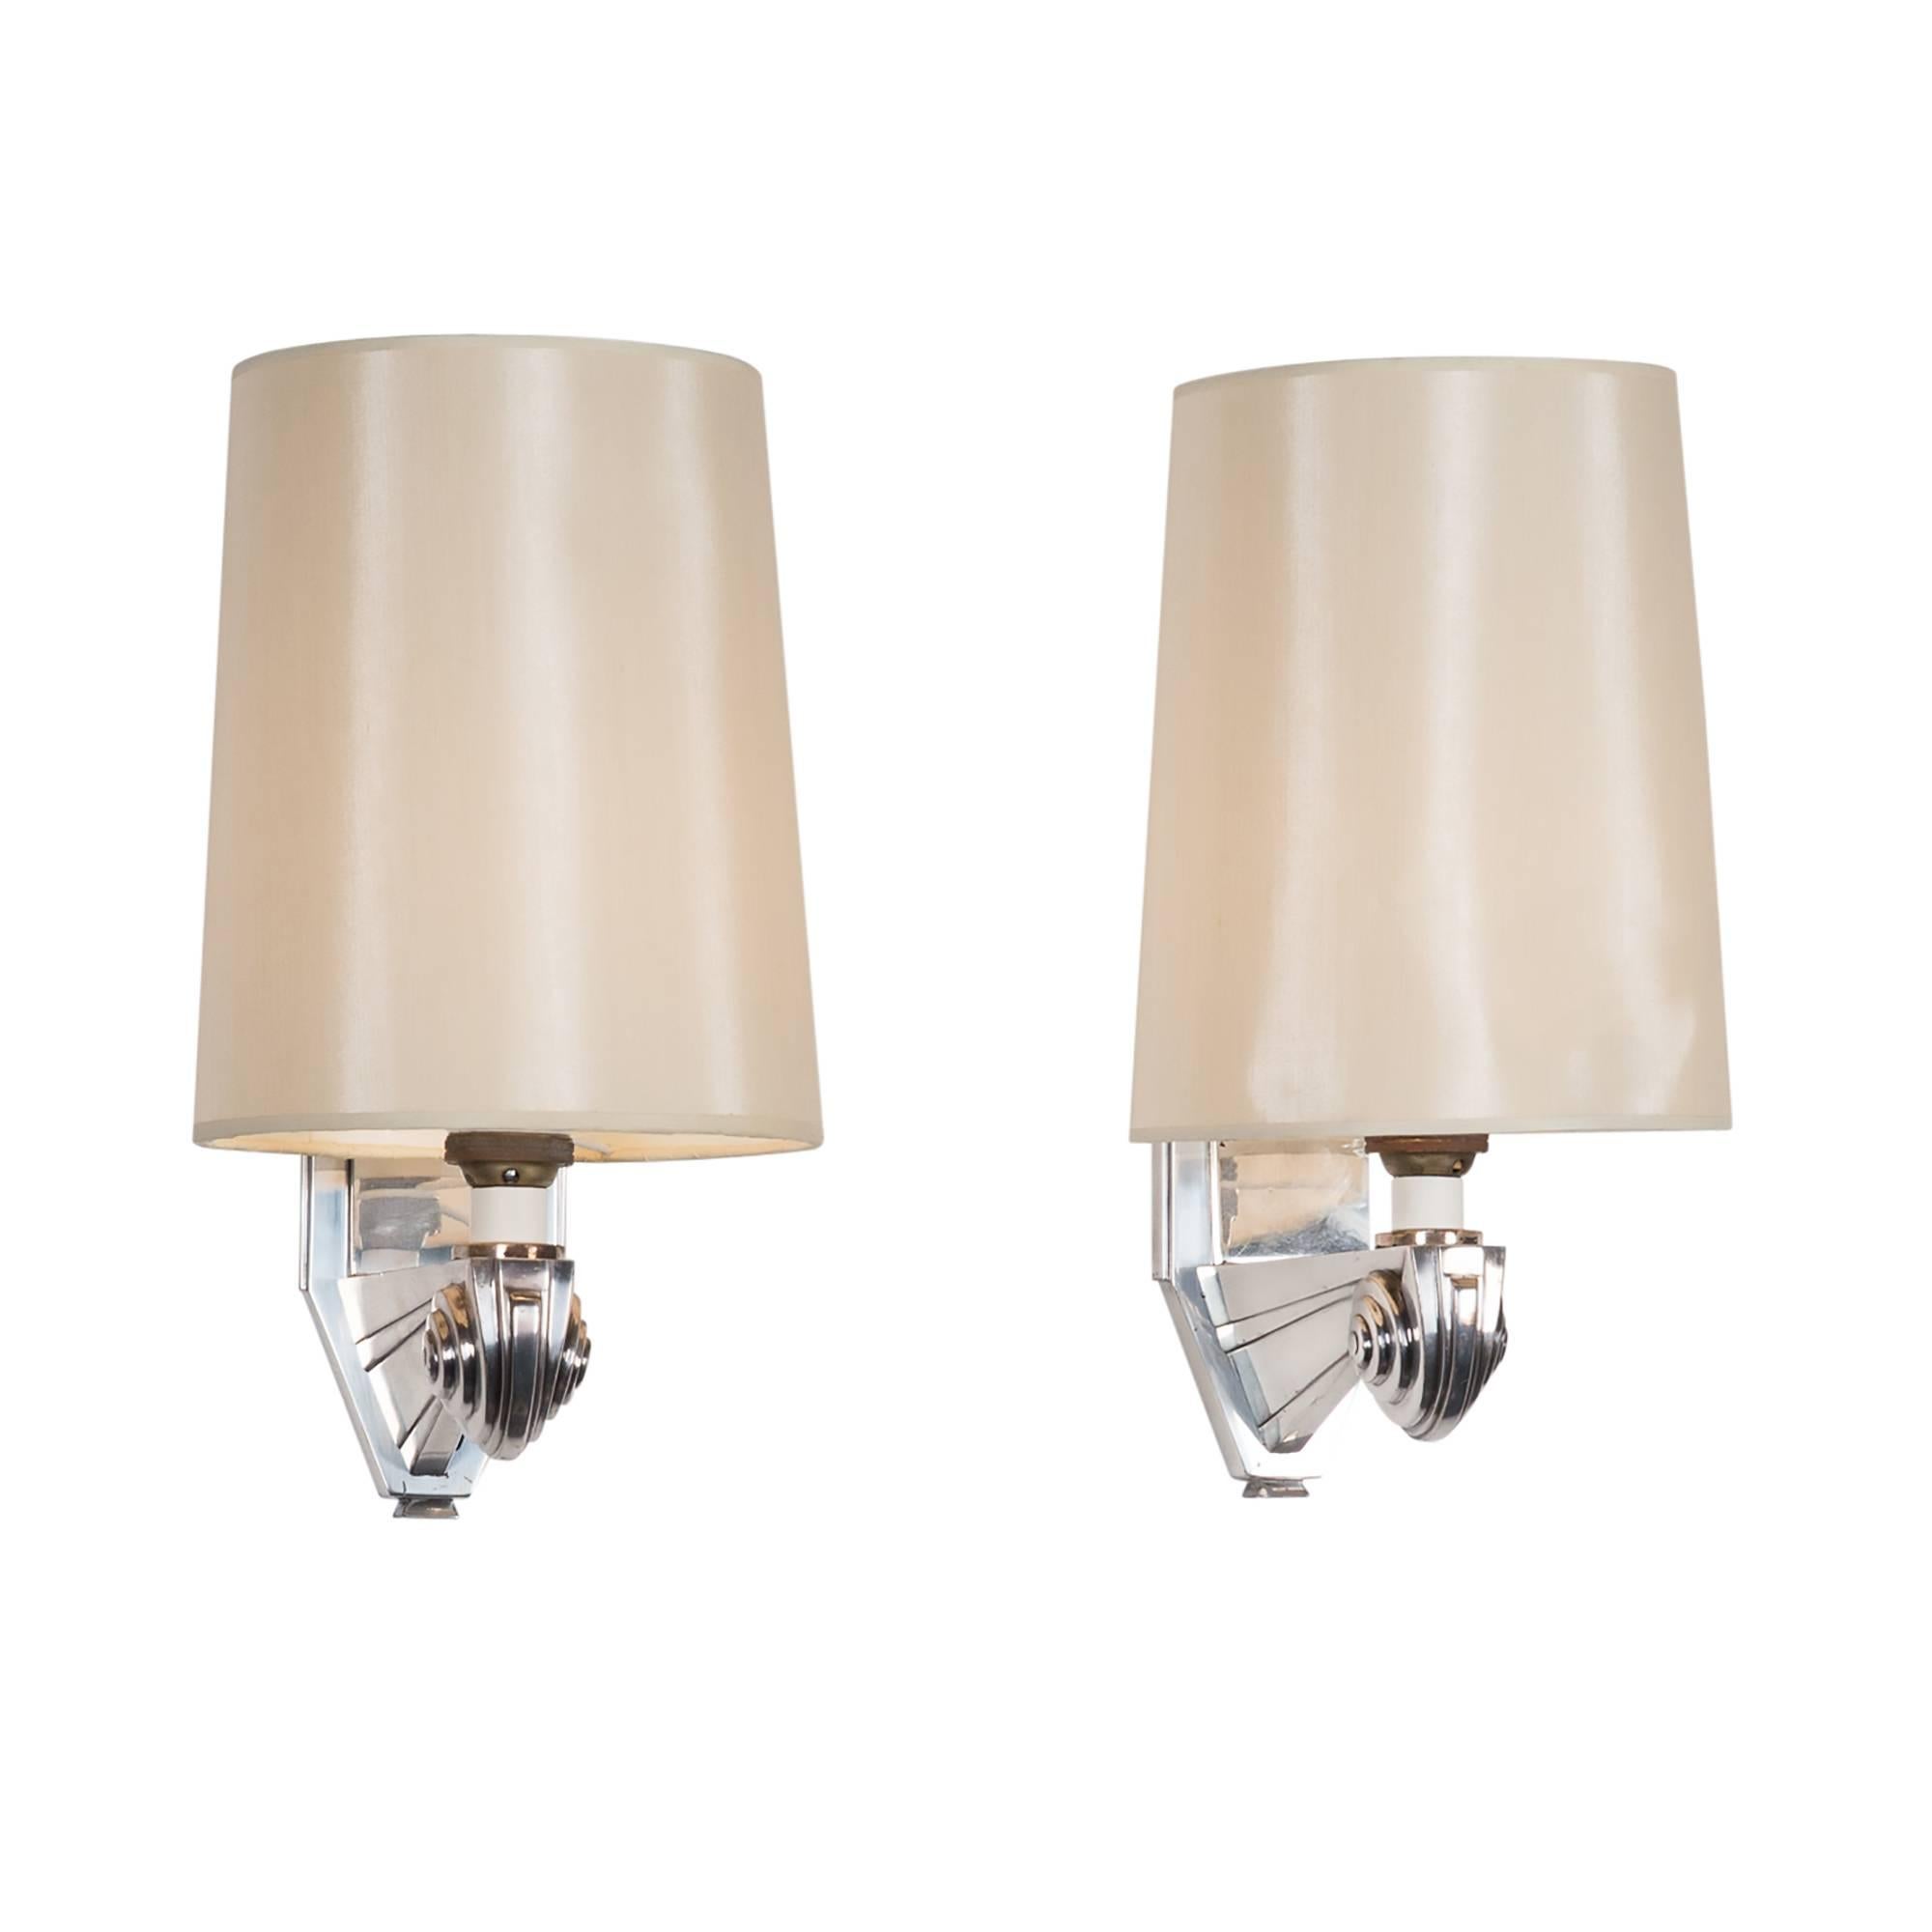 Pair of nickeled bronze one arm sconces, scroll arm, custom linen shades, France 1930s. Overall height 12 in, width 6 in, depth 8 in. Shades measure top diameter 5 in, bottom diameter 6 in, height 8 in.
  